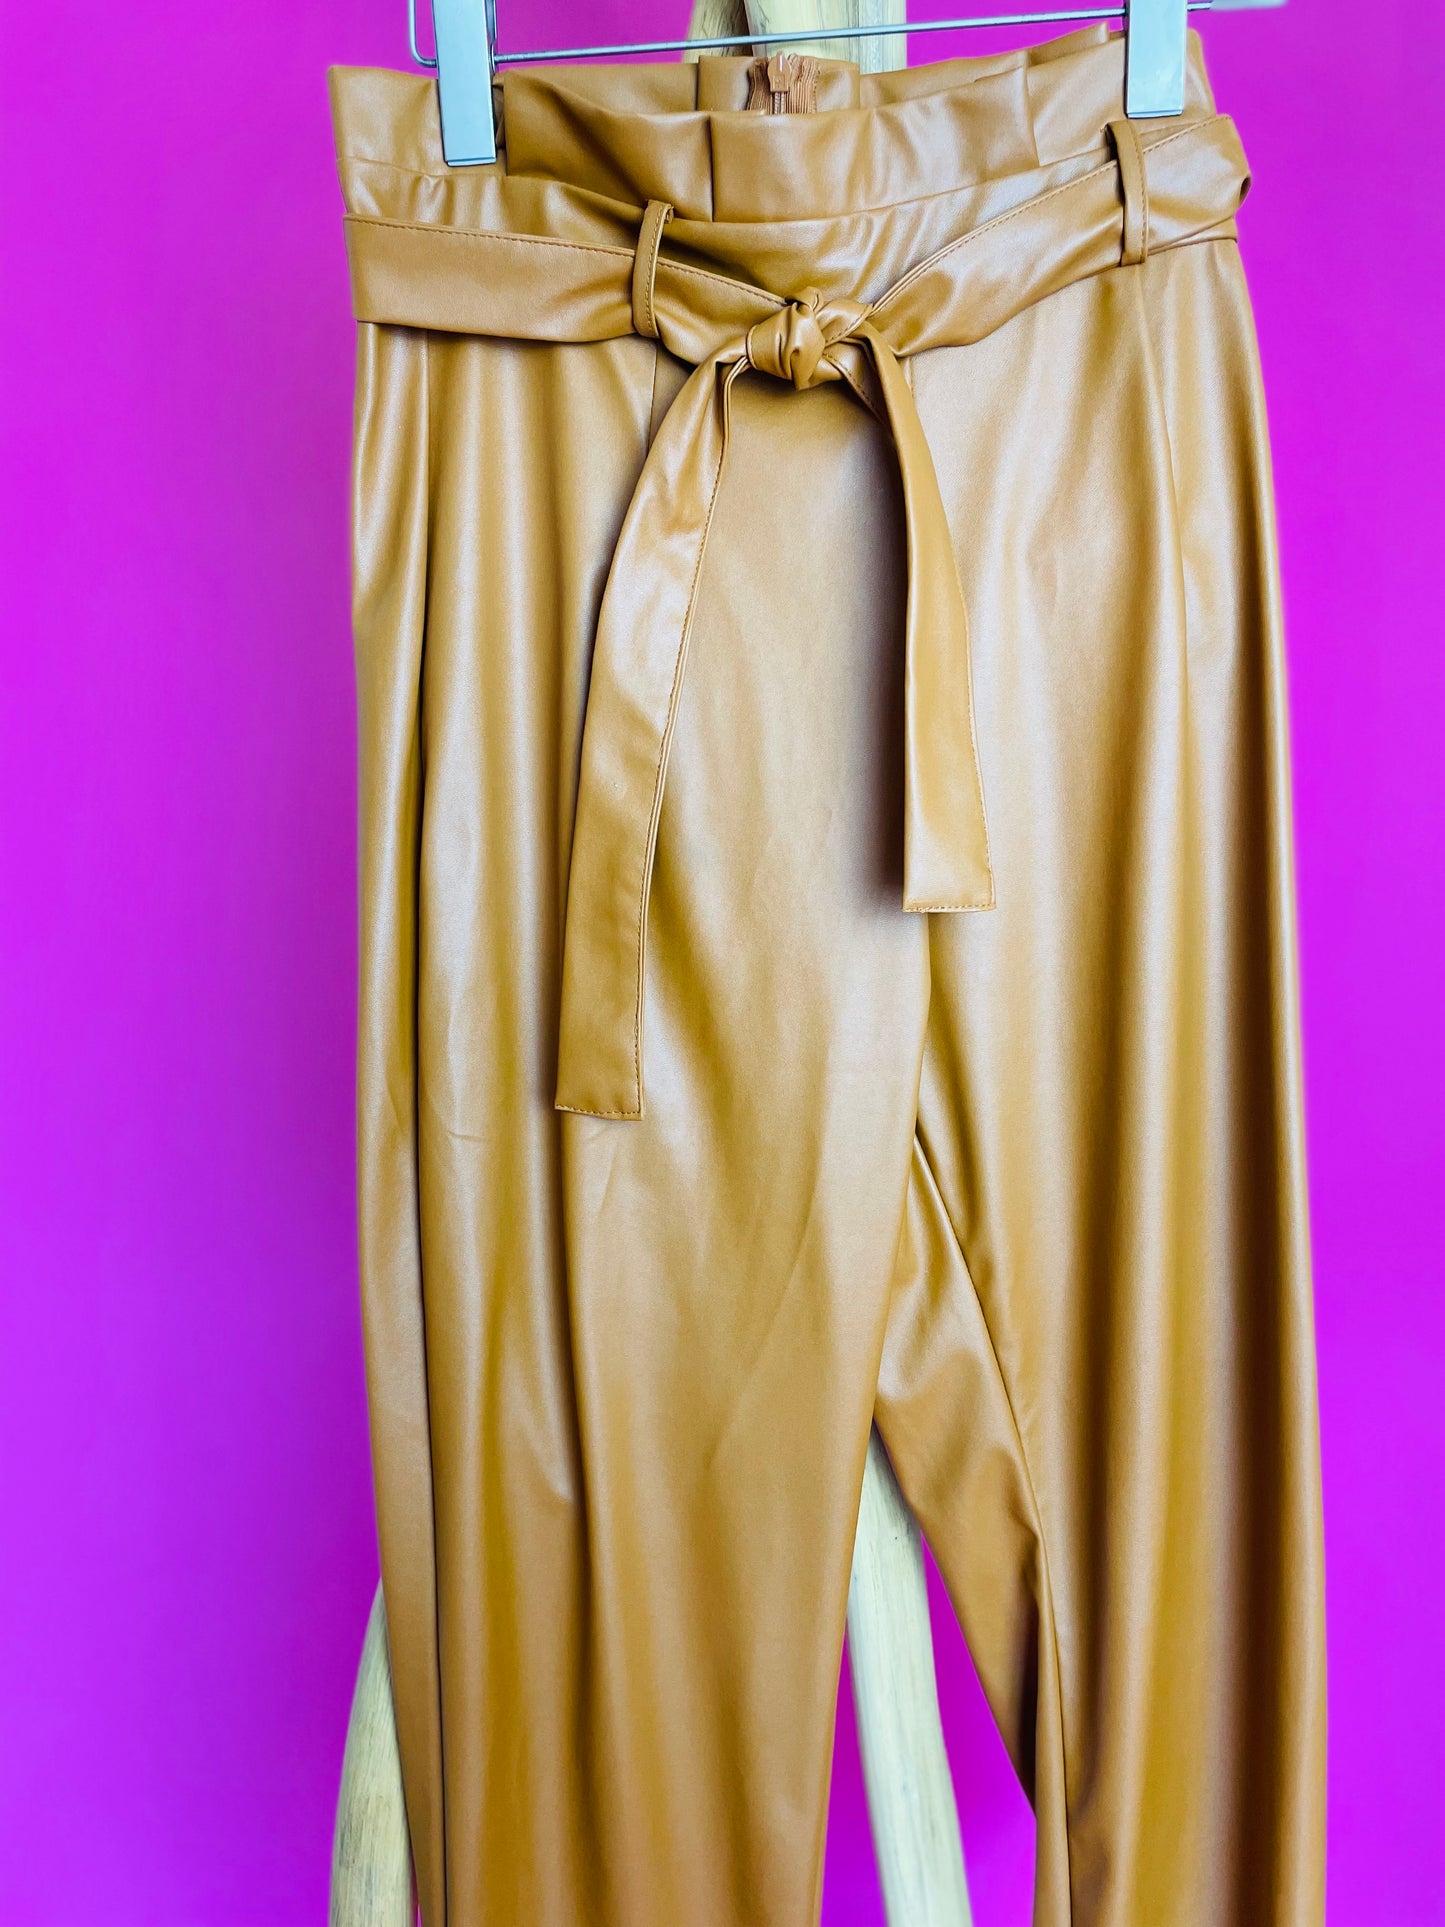 Belted leather pants